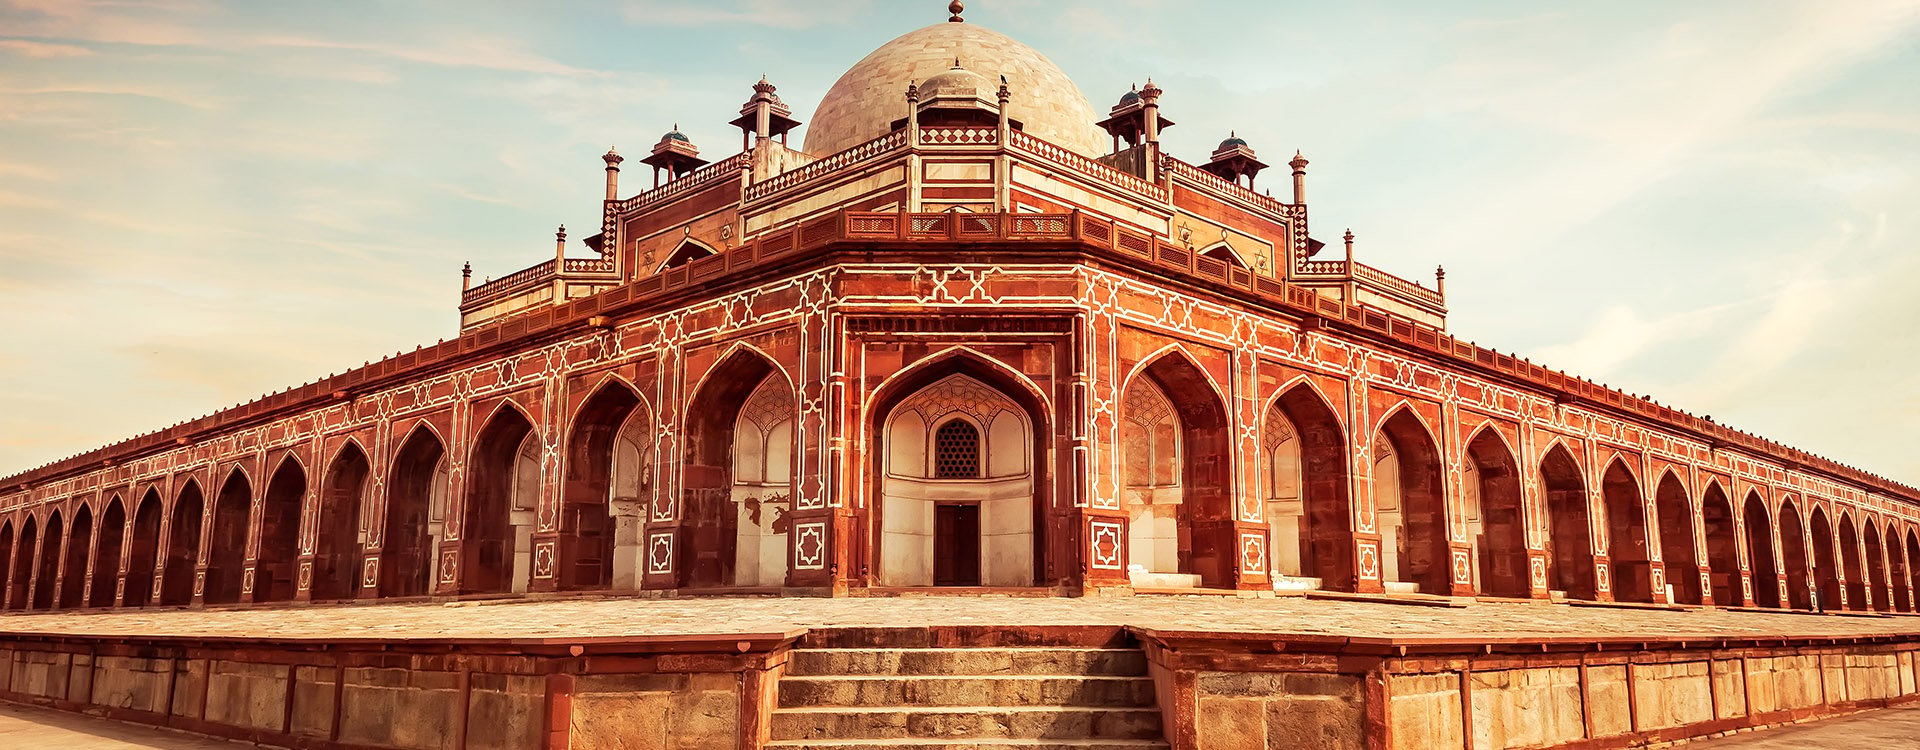 resting place of the Mughal Emperor Humayun in Delhi, India. It is a UNESCO World Heritage site